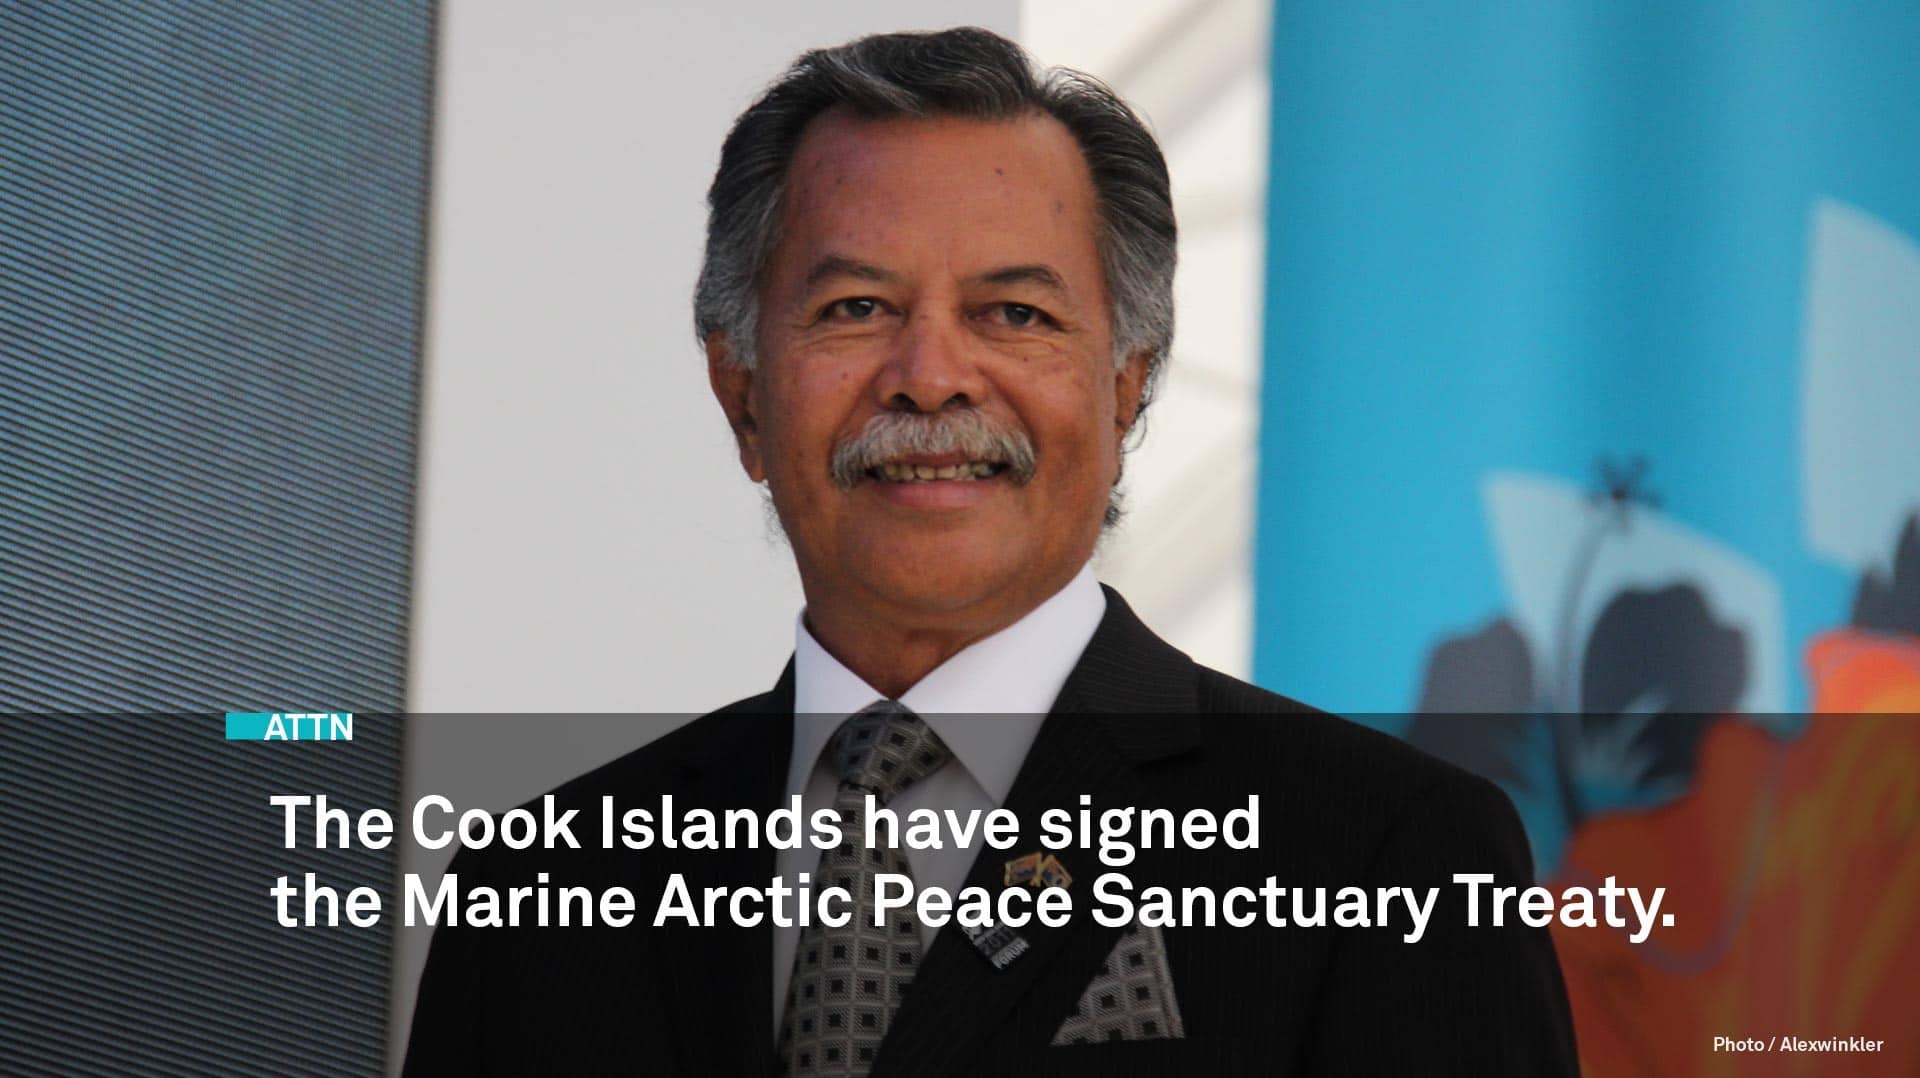 Cook Islands' Prime Minister Henry Puna signs MAPS, Marine Arctic Peace Sanctuary